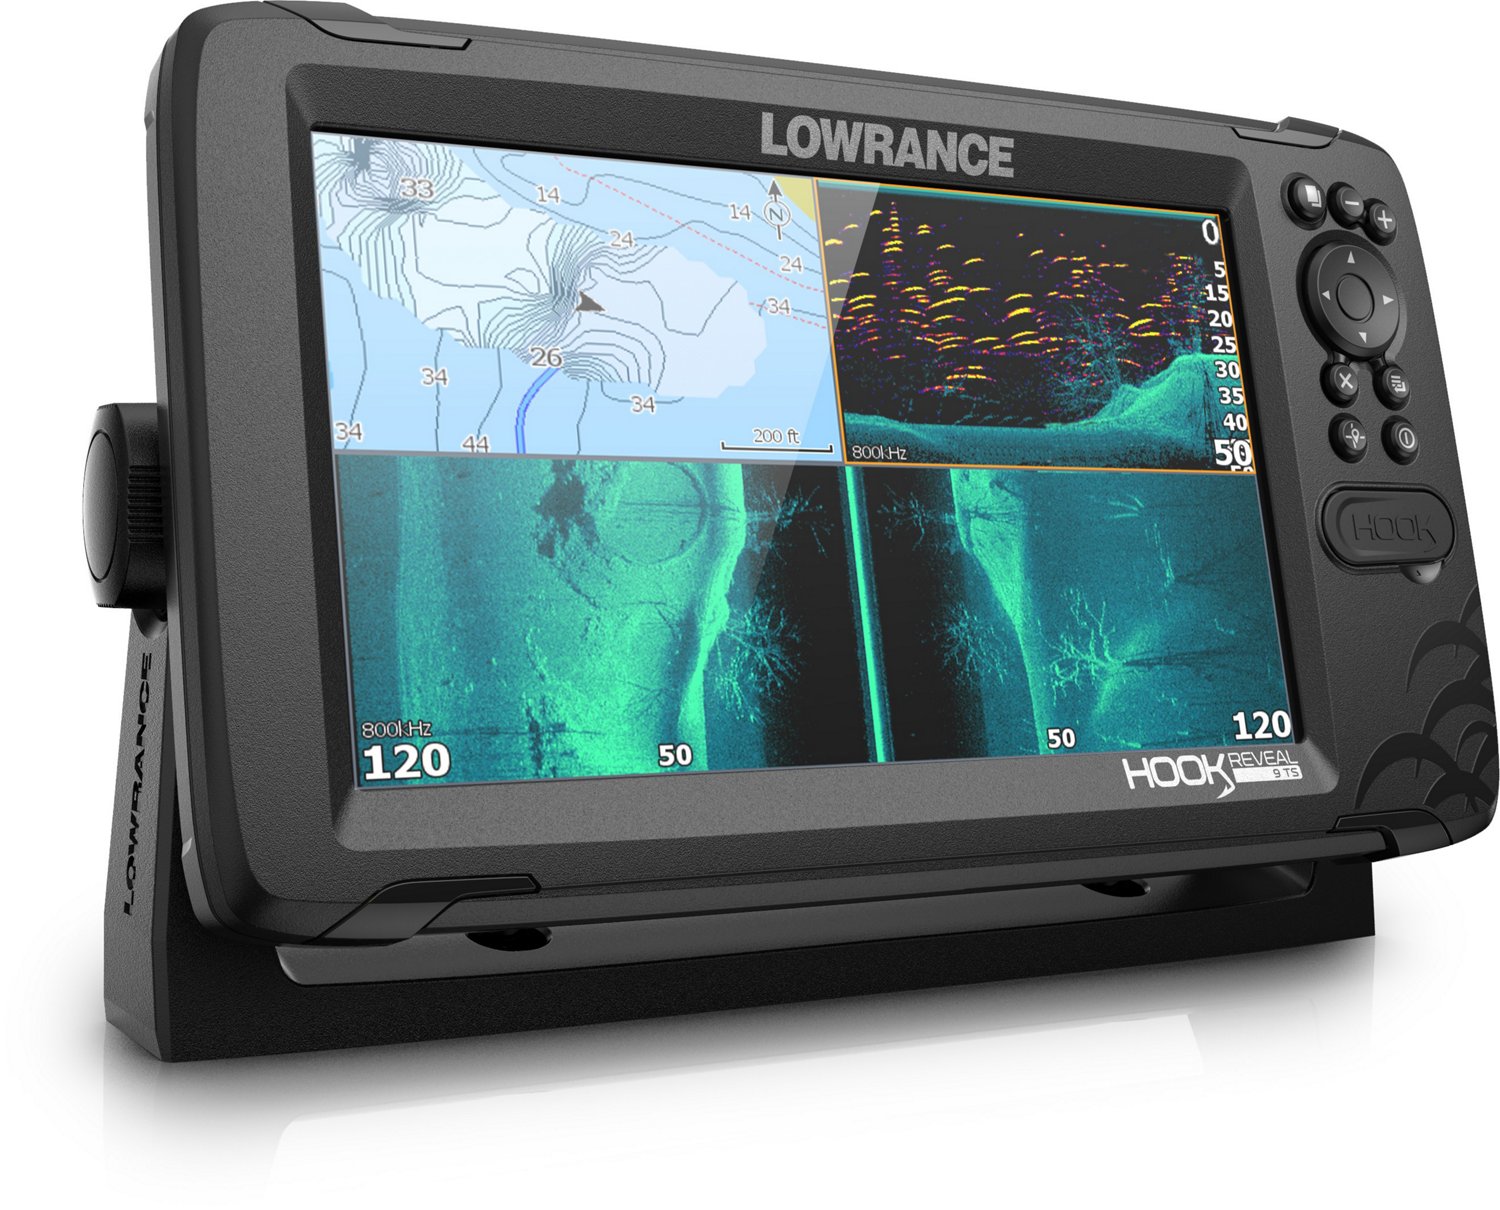 Lowrance Hook Reveal 9 [Unboxing & Review] 